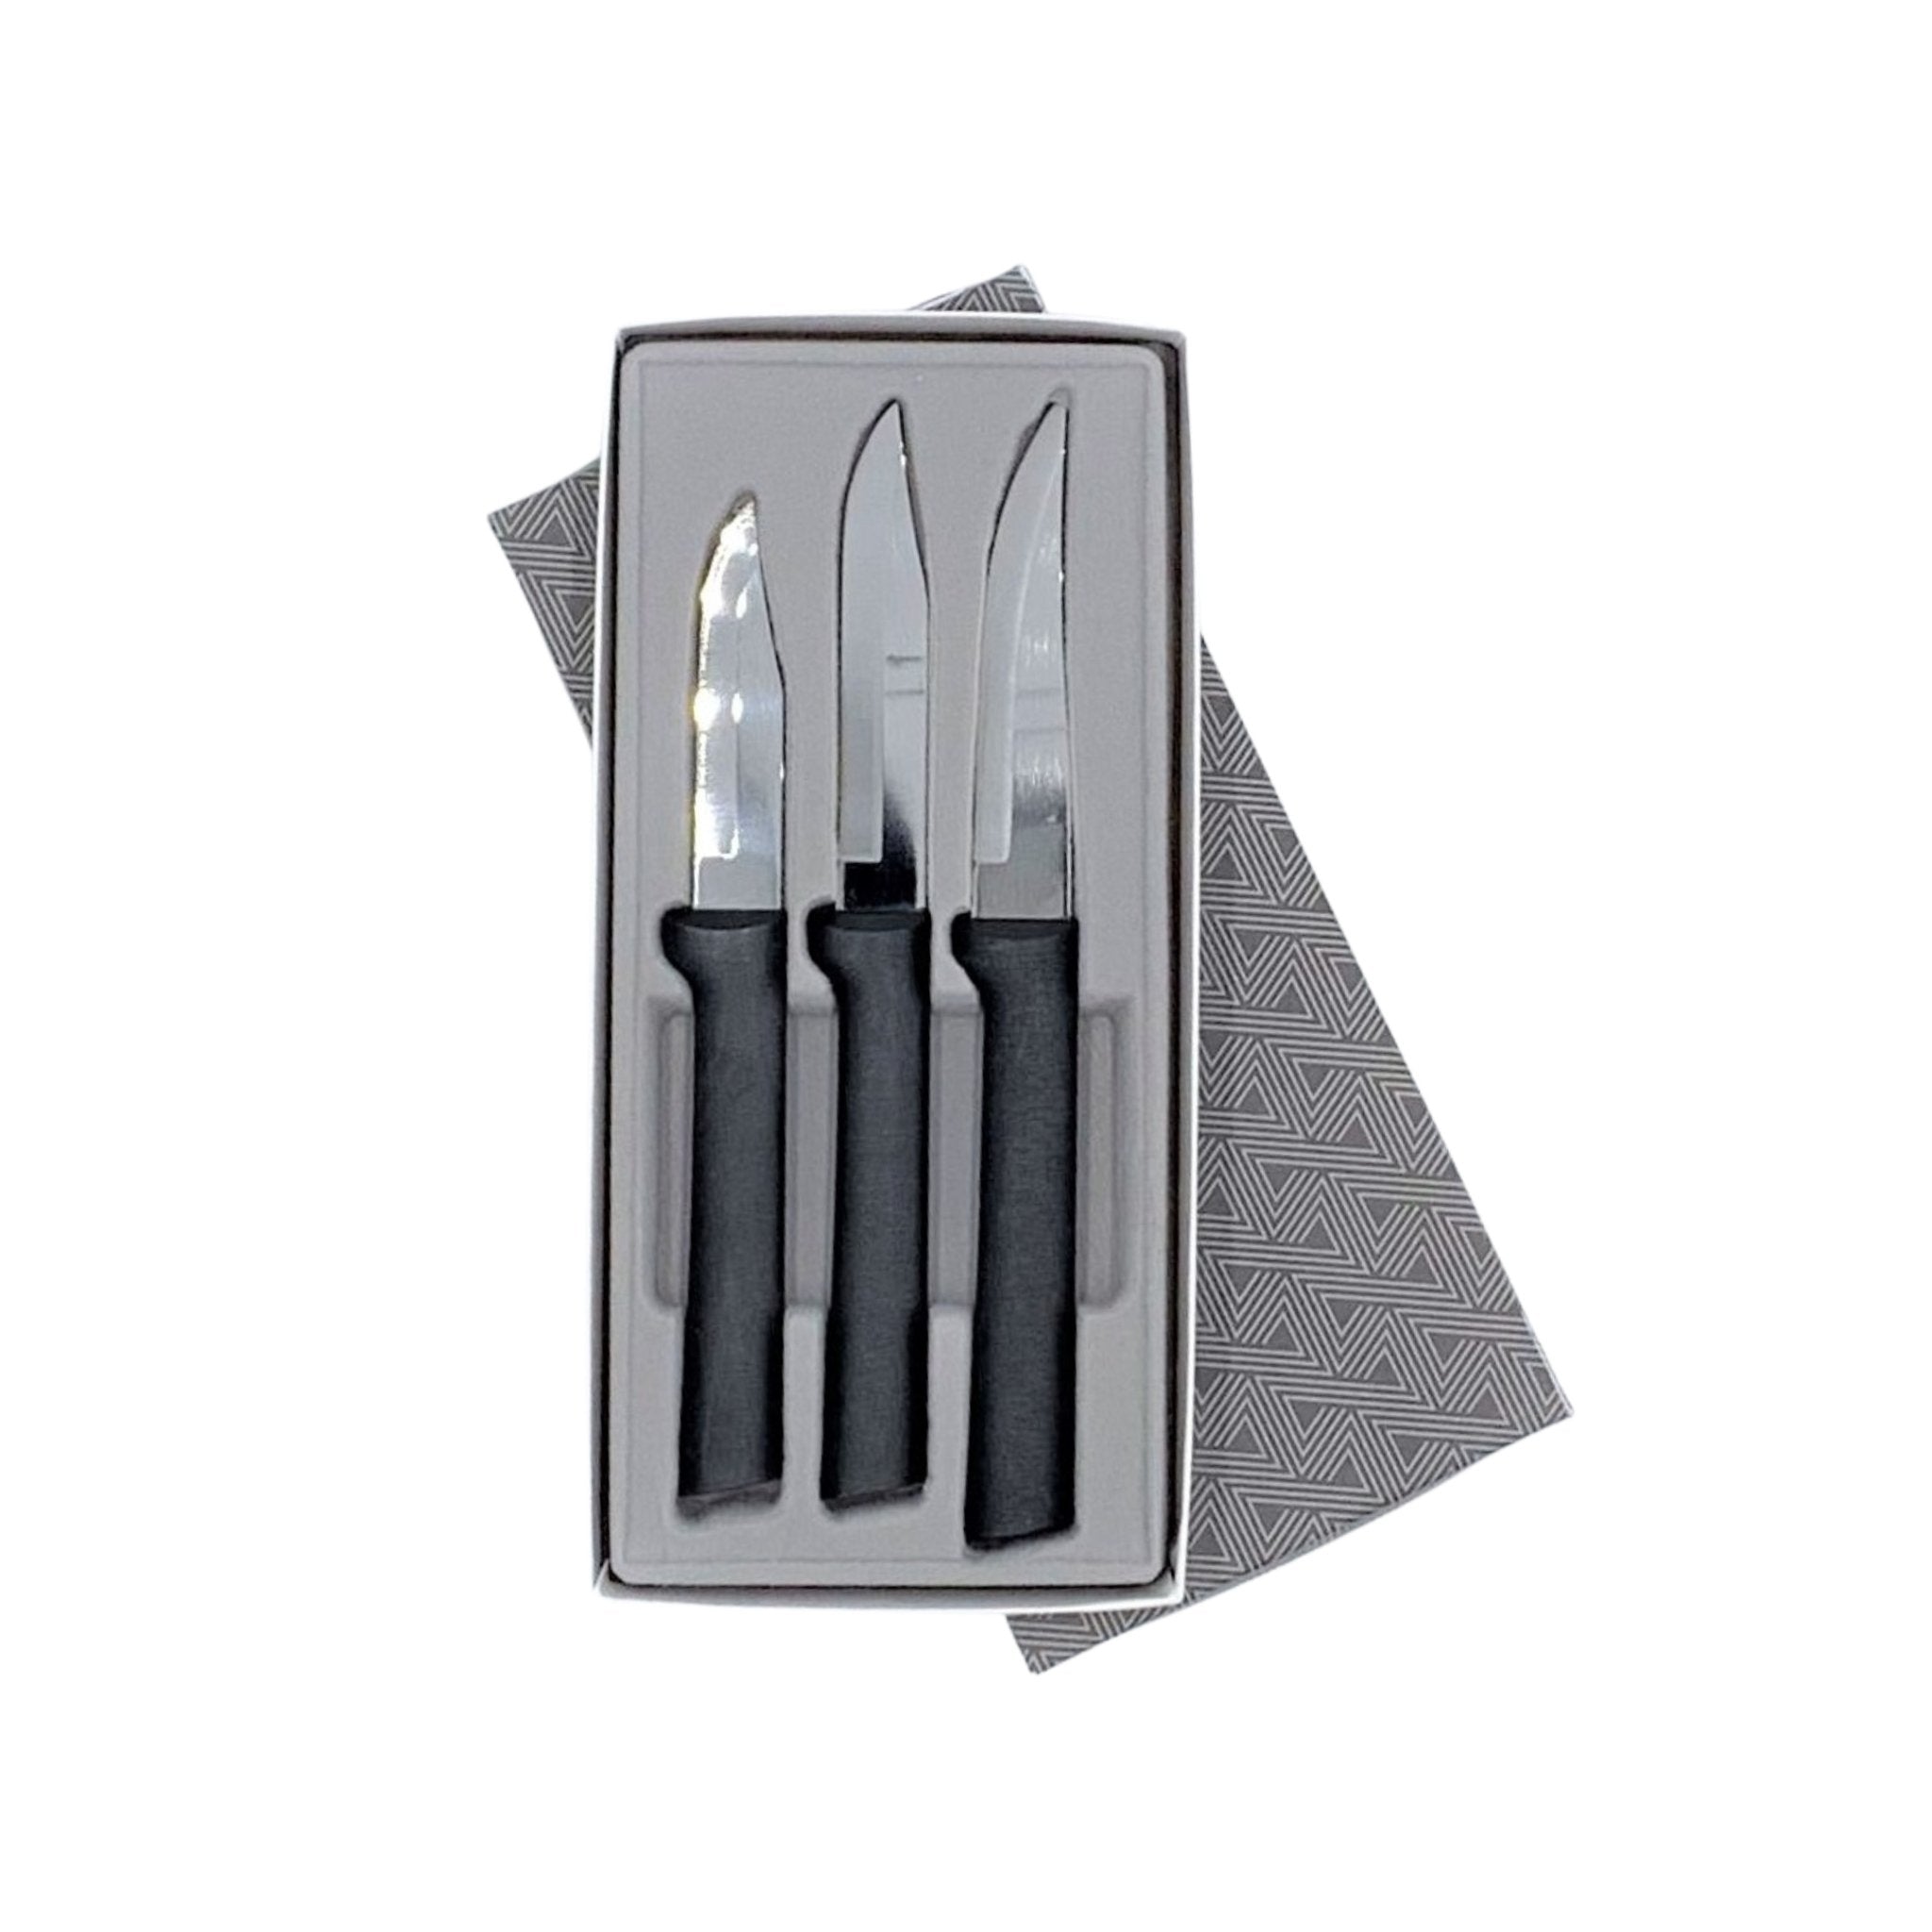 Rada Cutlery 2-Piece Paring Knife Set and Knife Sharpener Stainless